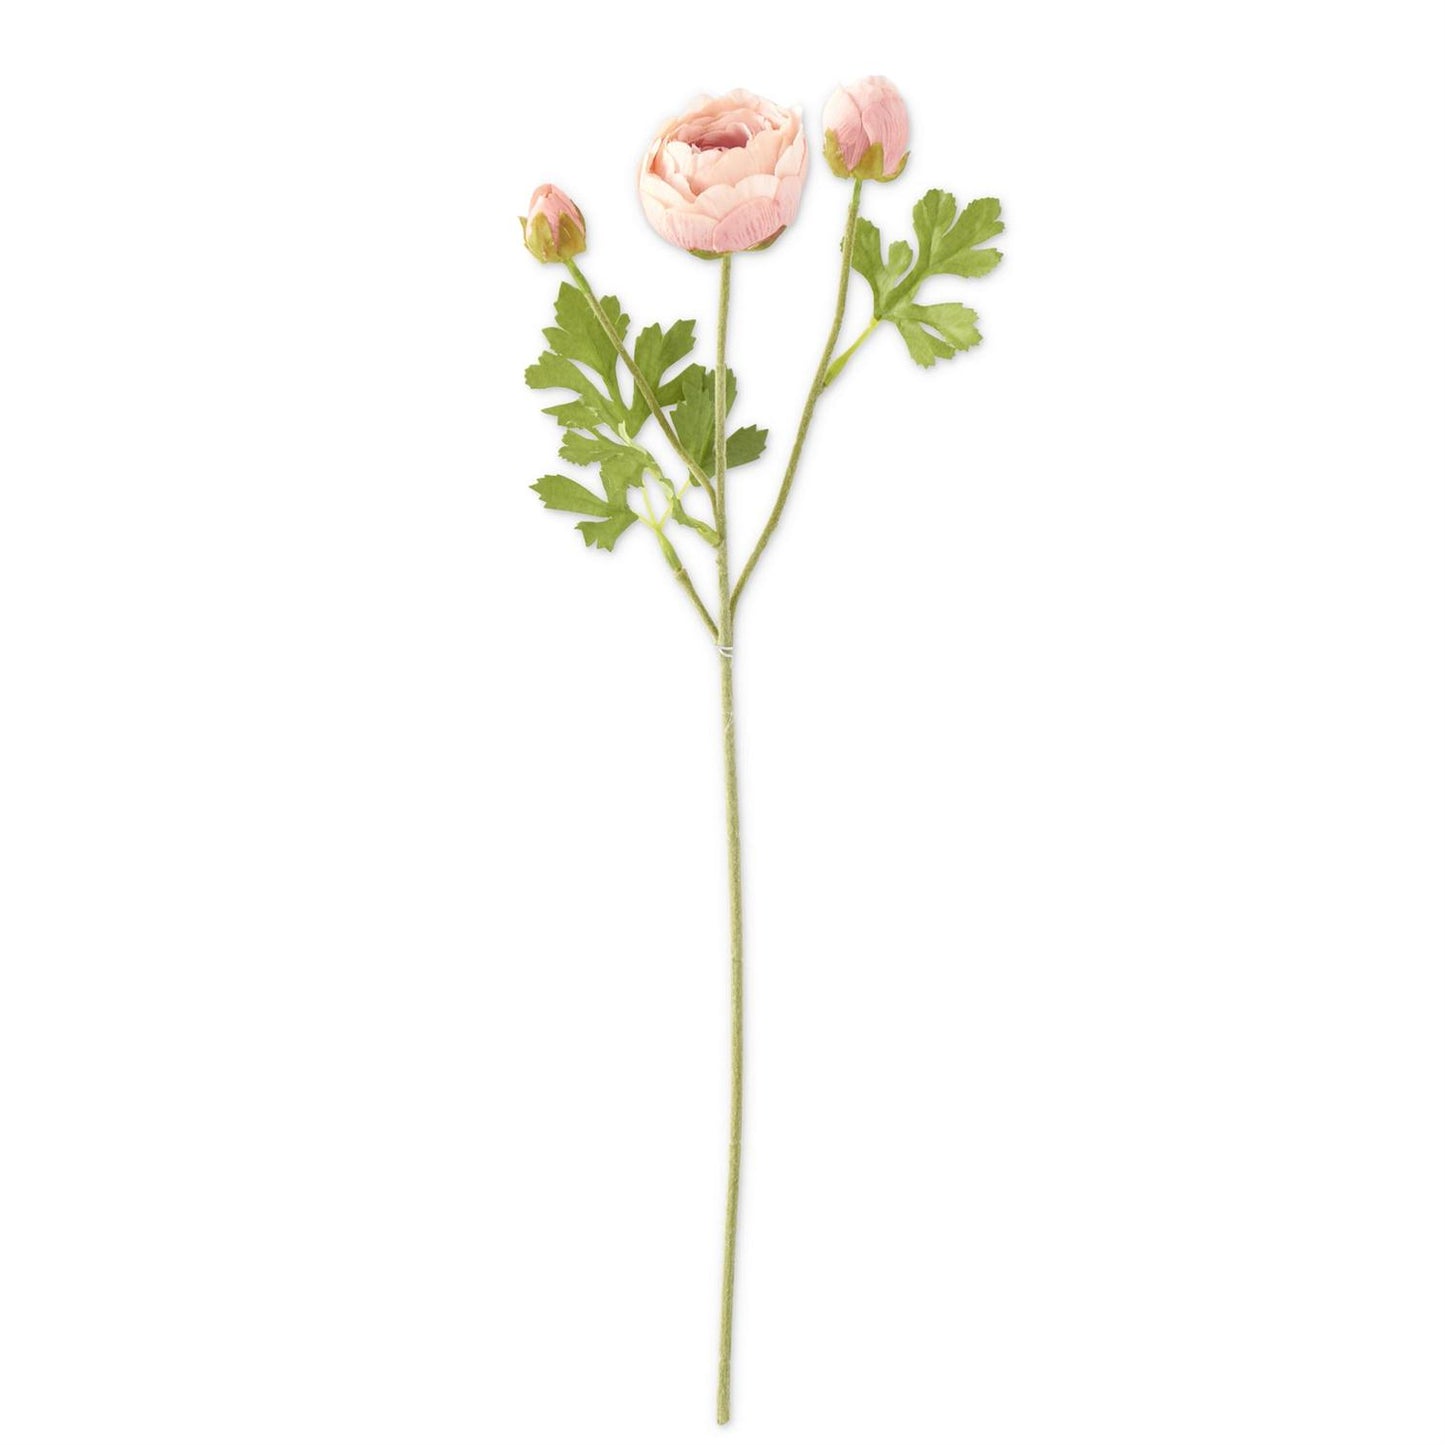 21" Real Touch 3 Head Ranunculus Stem - 3 colors available